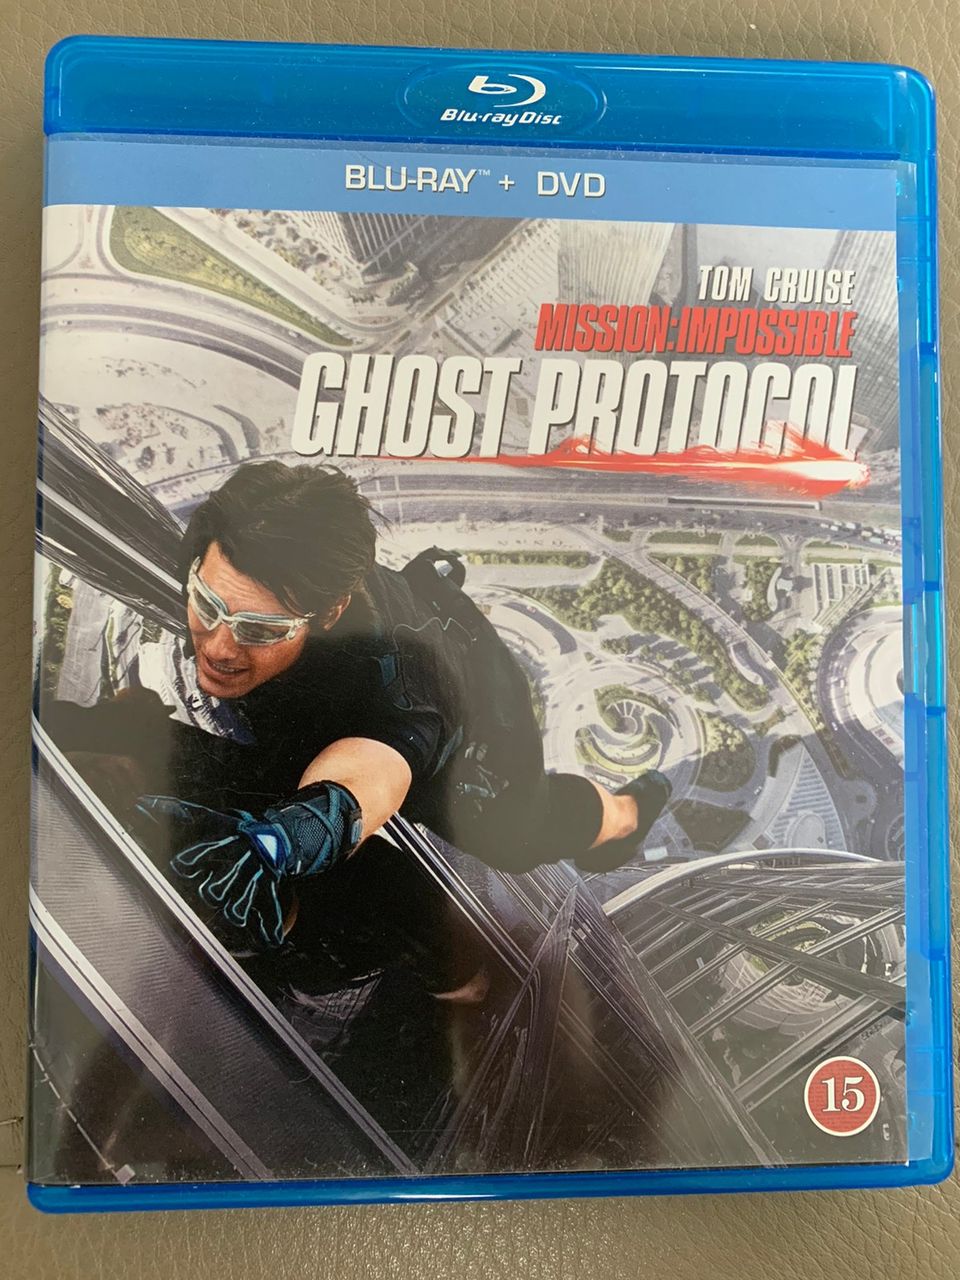 Ghost Protocol Mission Impossible Tom Cruise